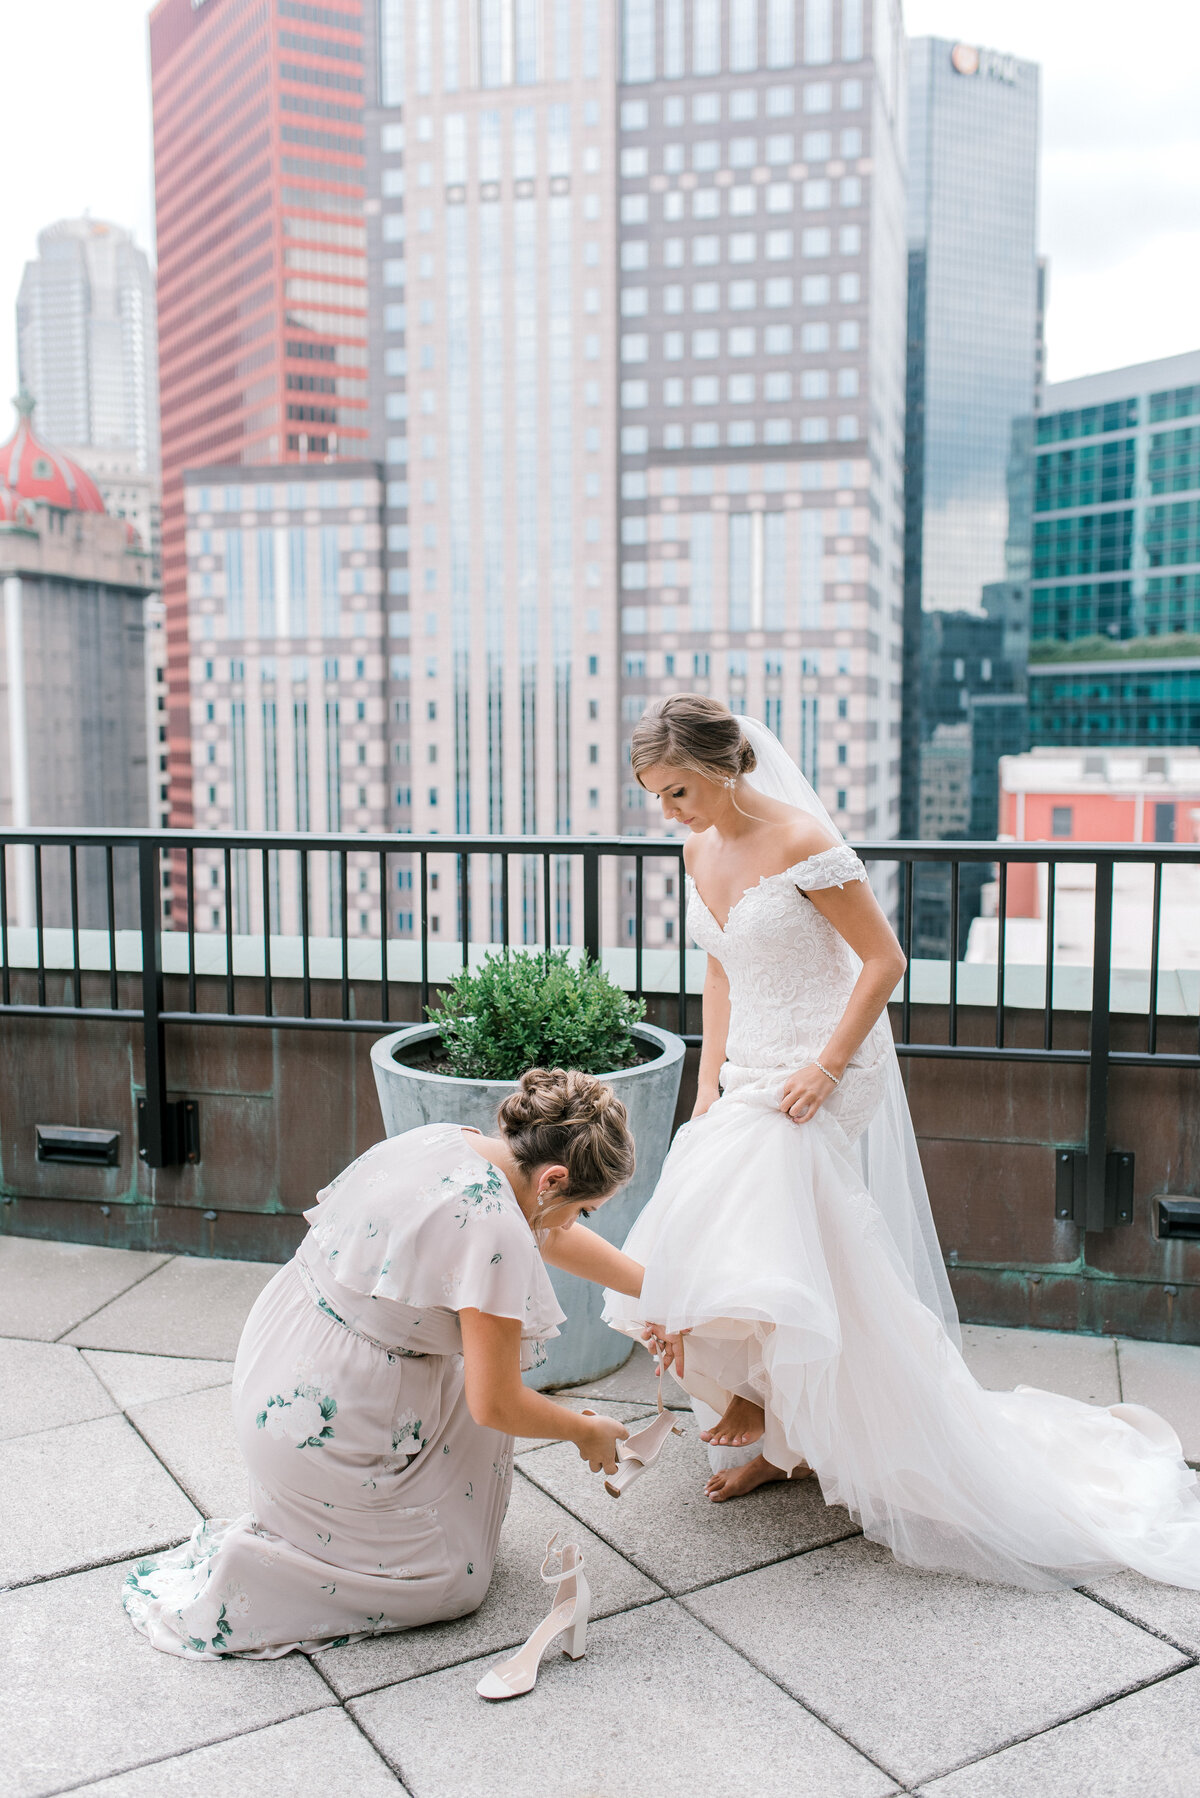 Bride getting ready on the balcony overlooking Pittsburgh skyline